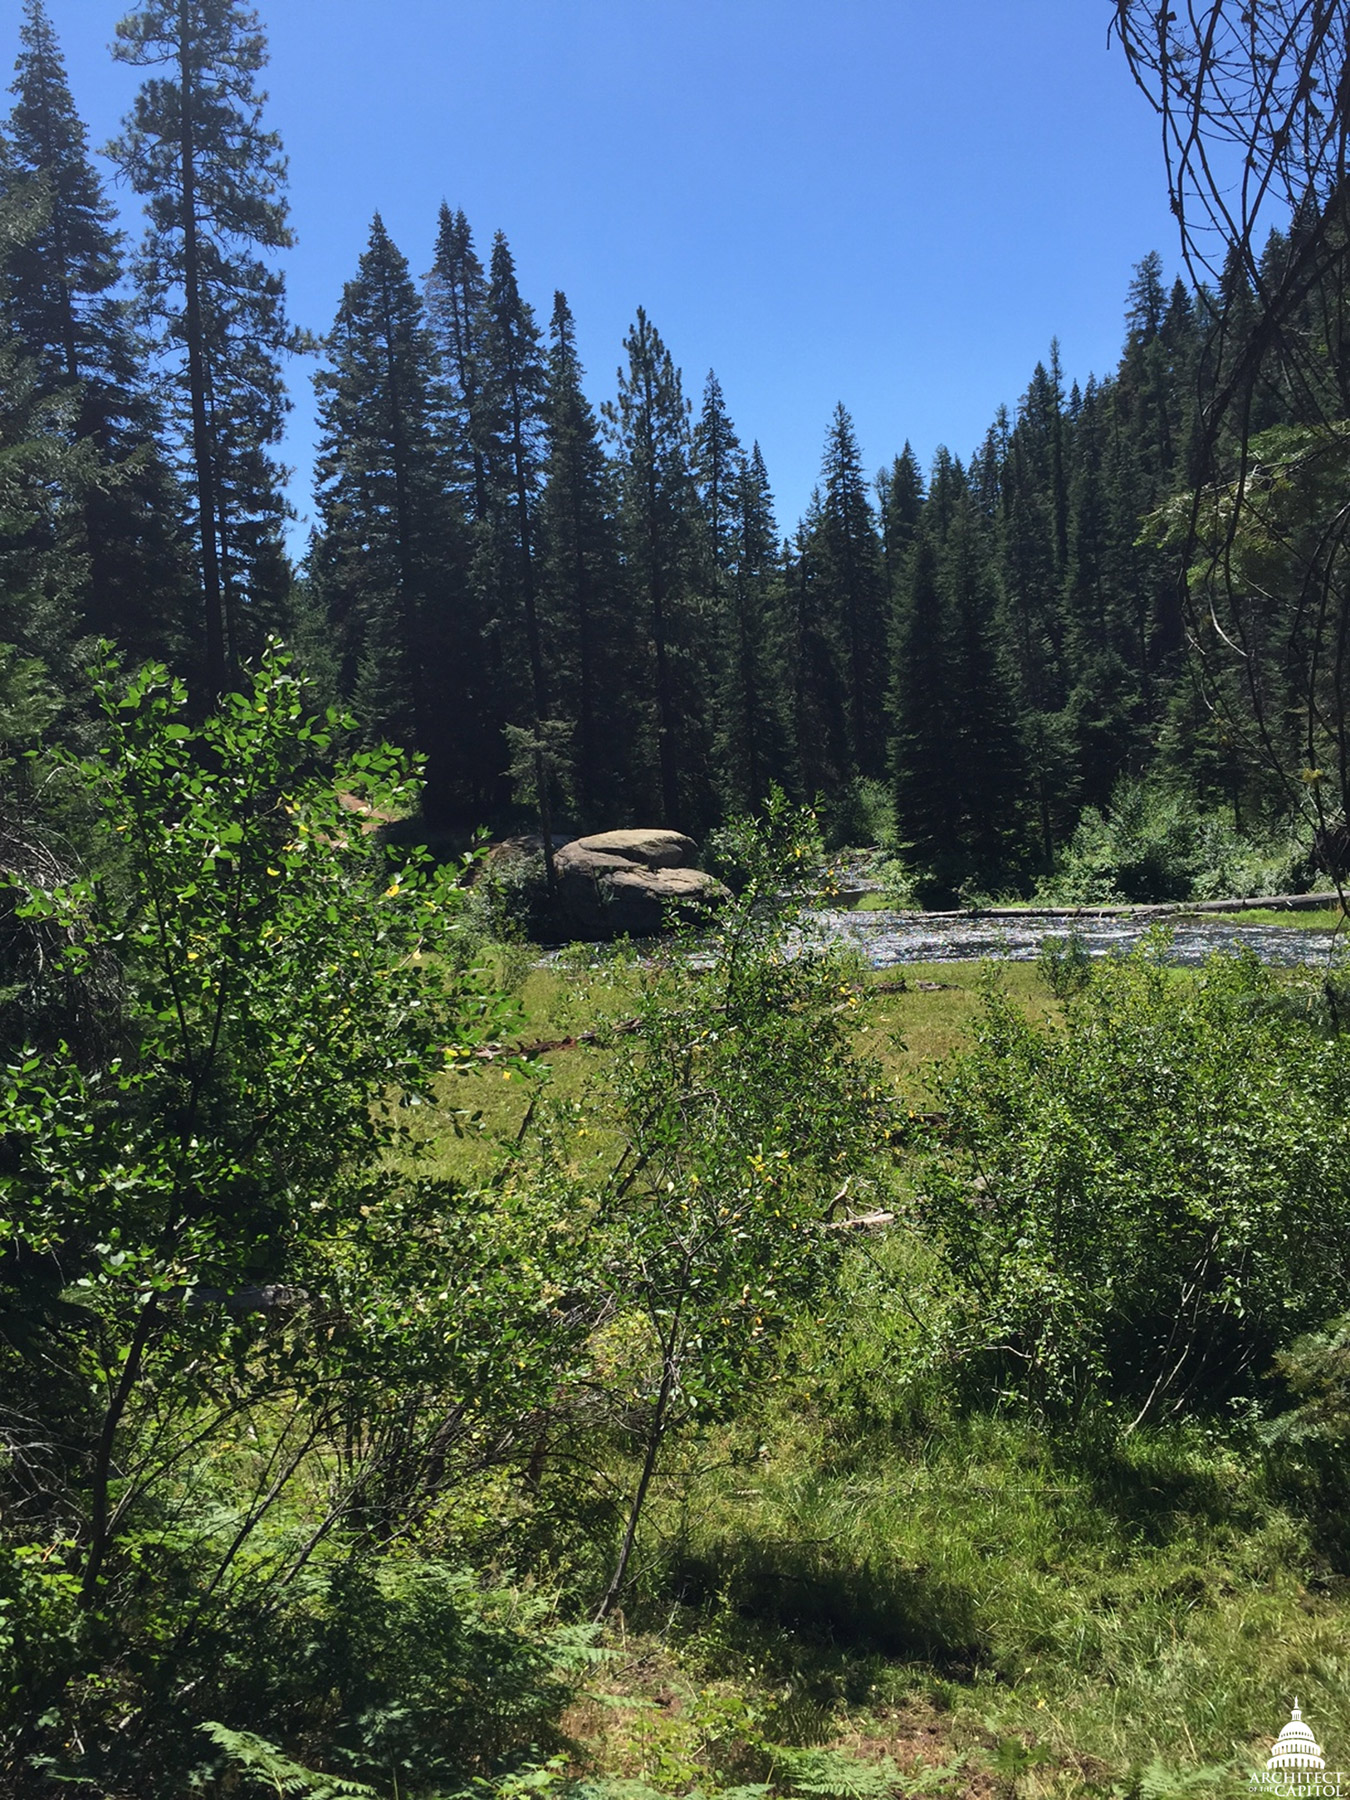 Payette National Forest